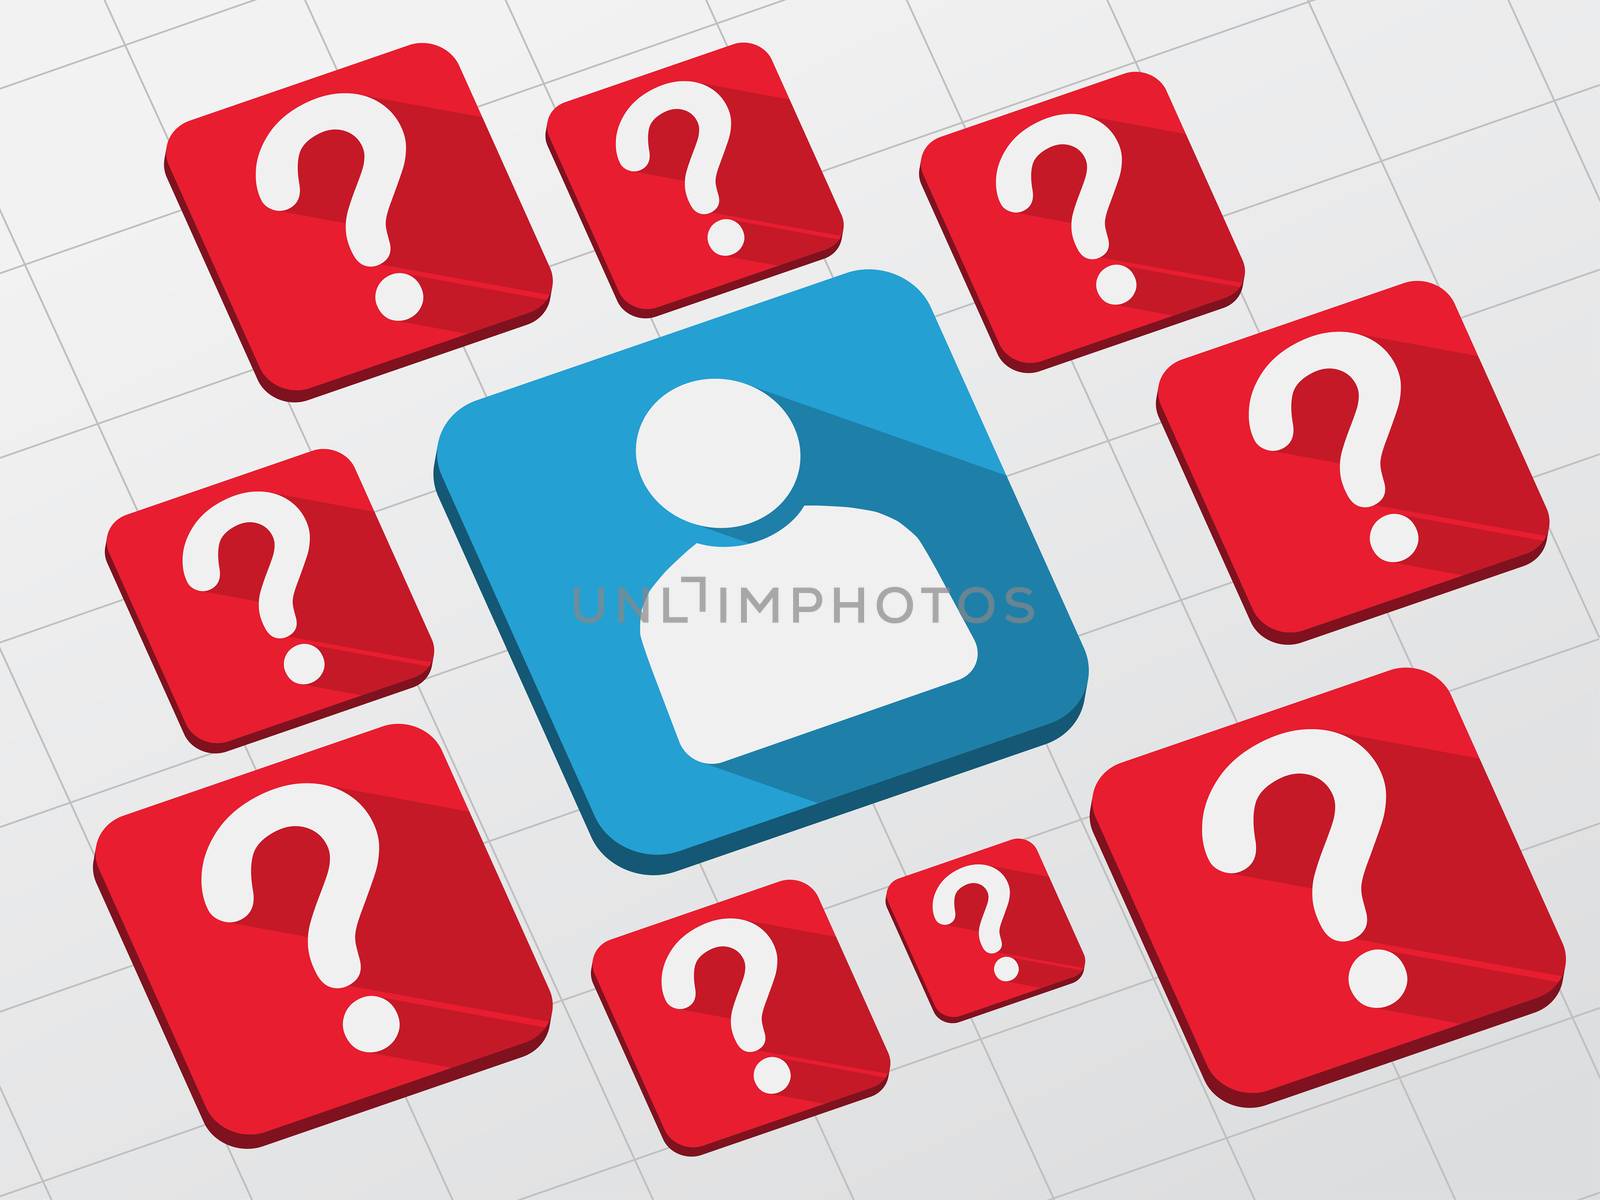 person sign with question marks - white symbols in blue and red flat design blocks, business creative concept